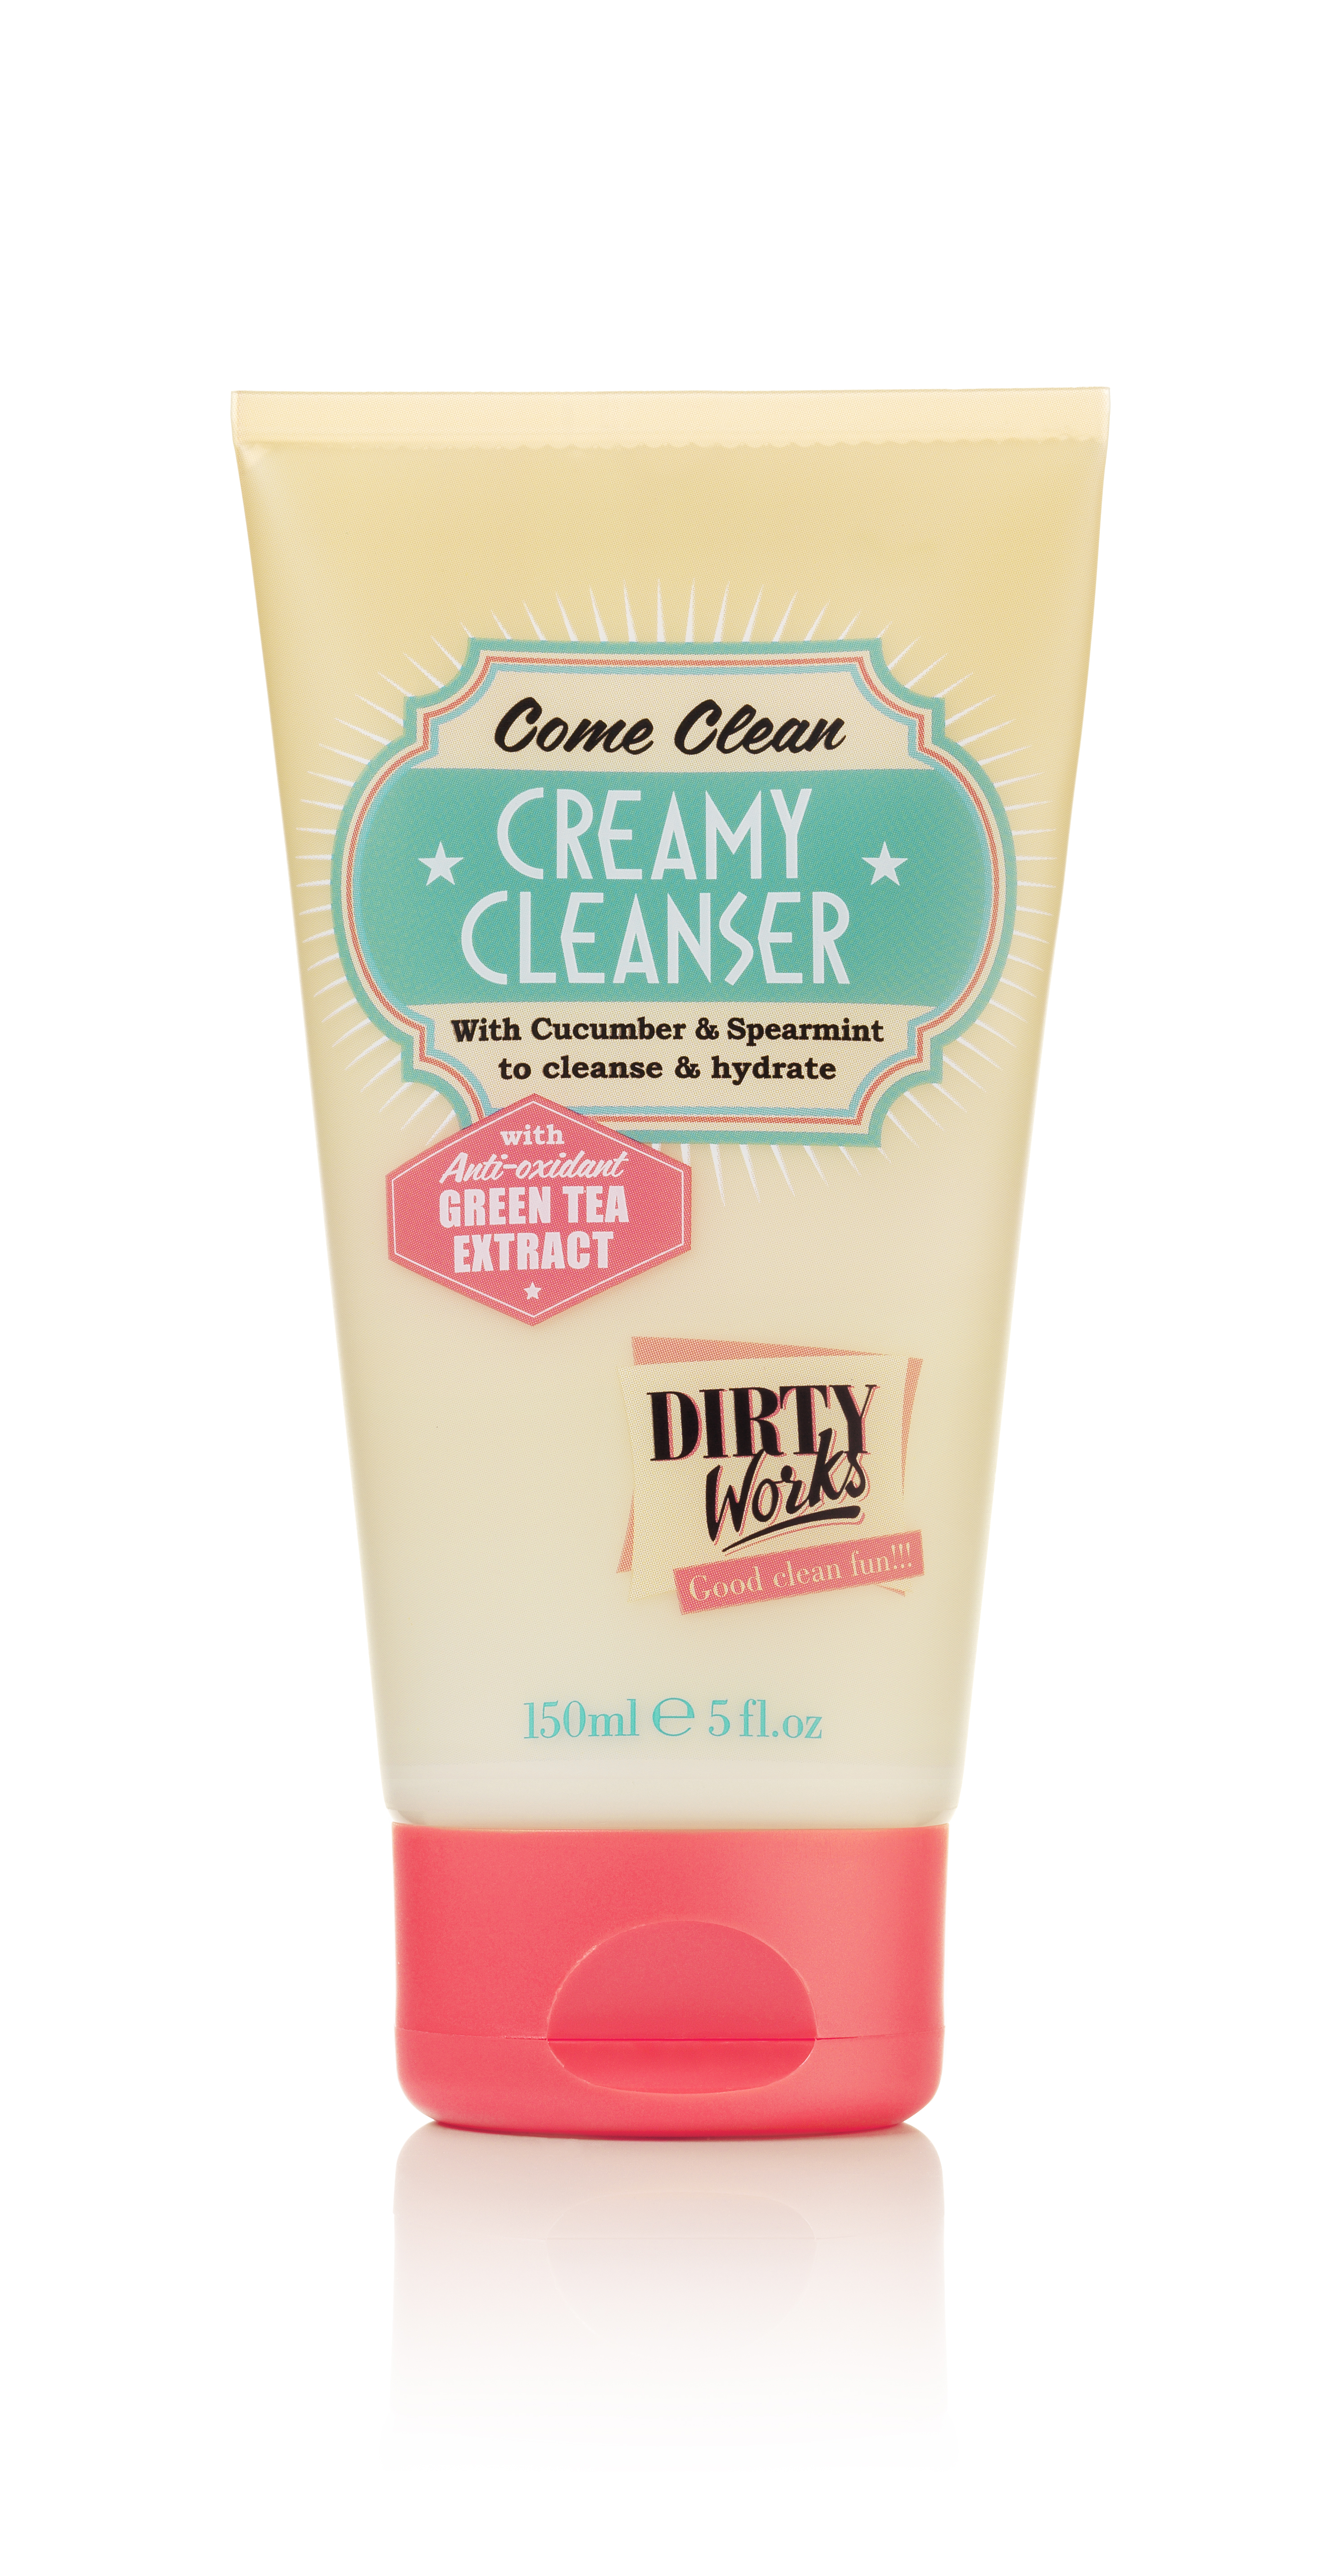 Dirty Works Come Clean Creamy Cleanser 150ml